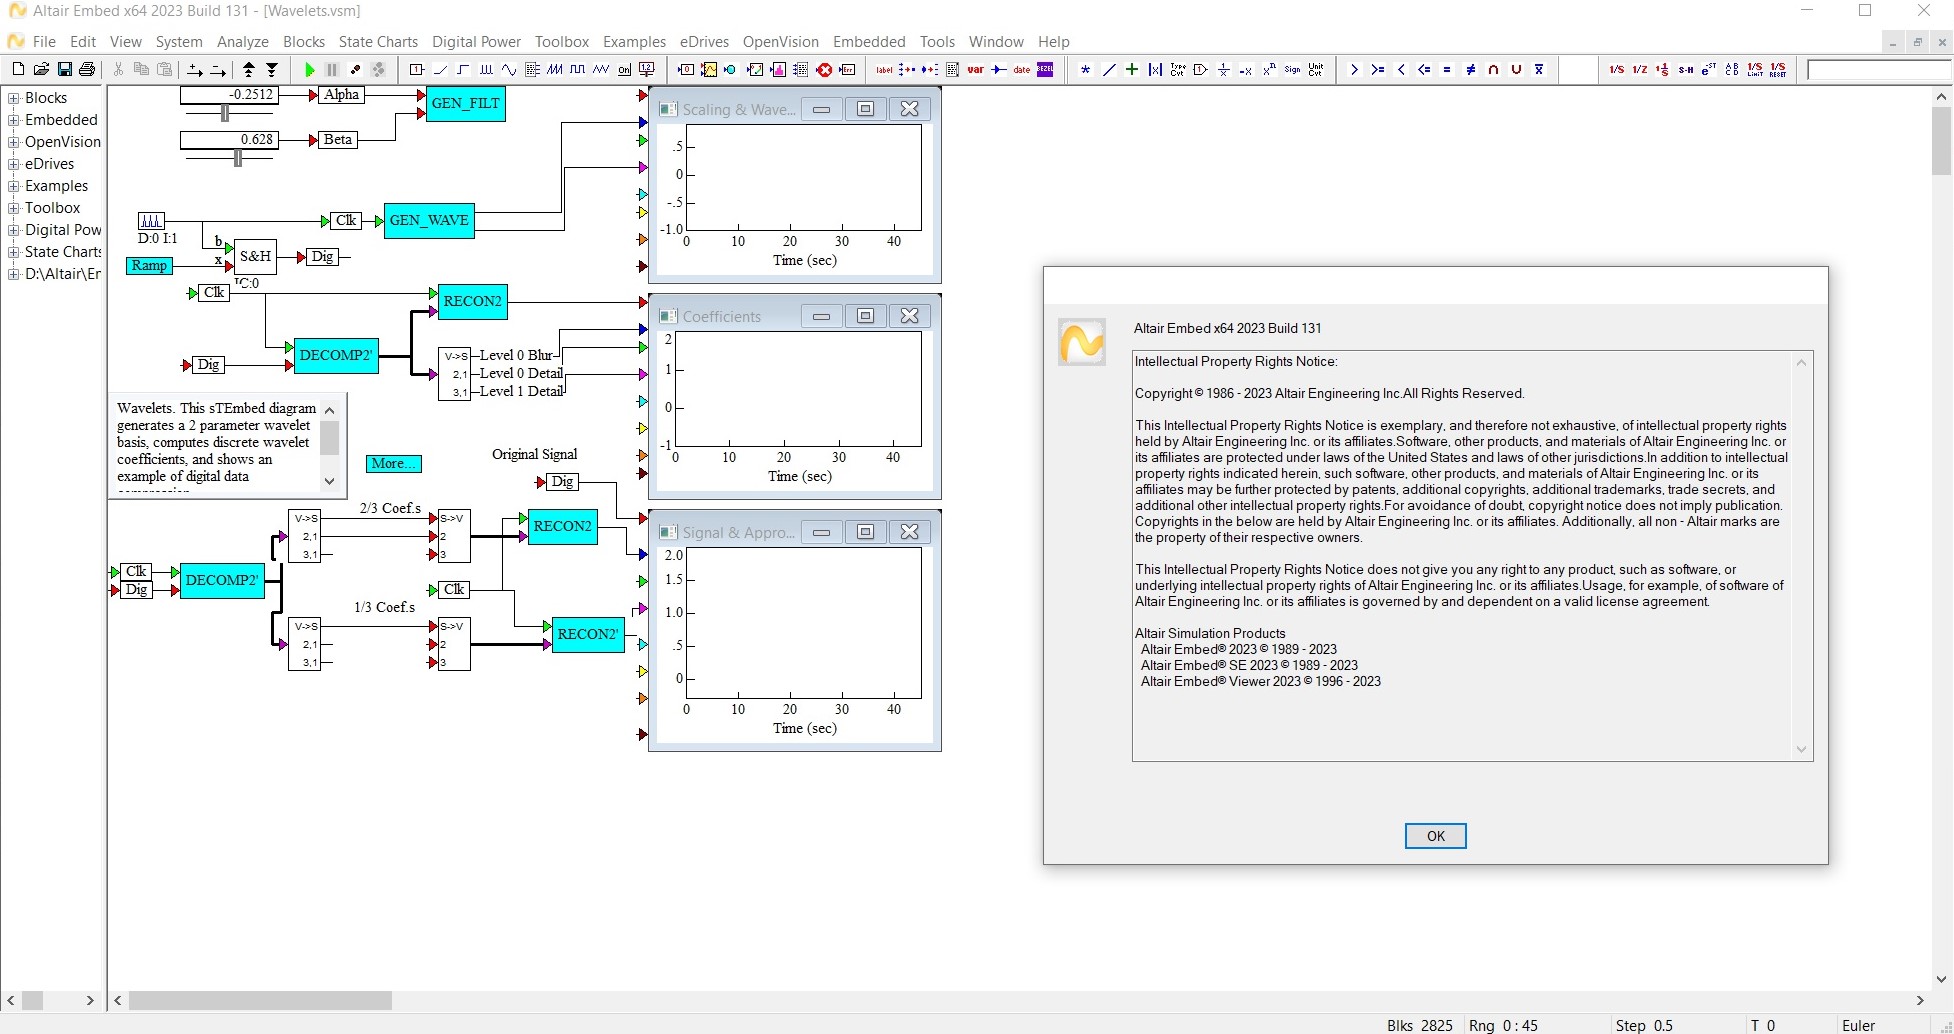 Working with Altair Embed 2023.0 full license